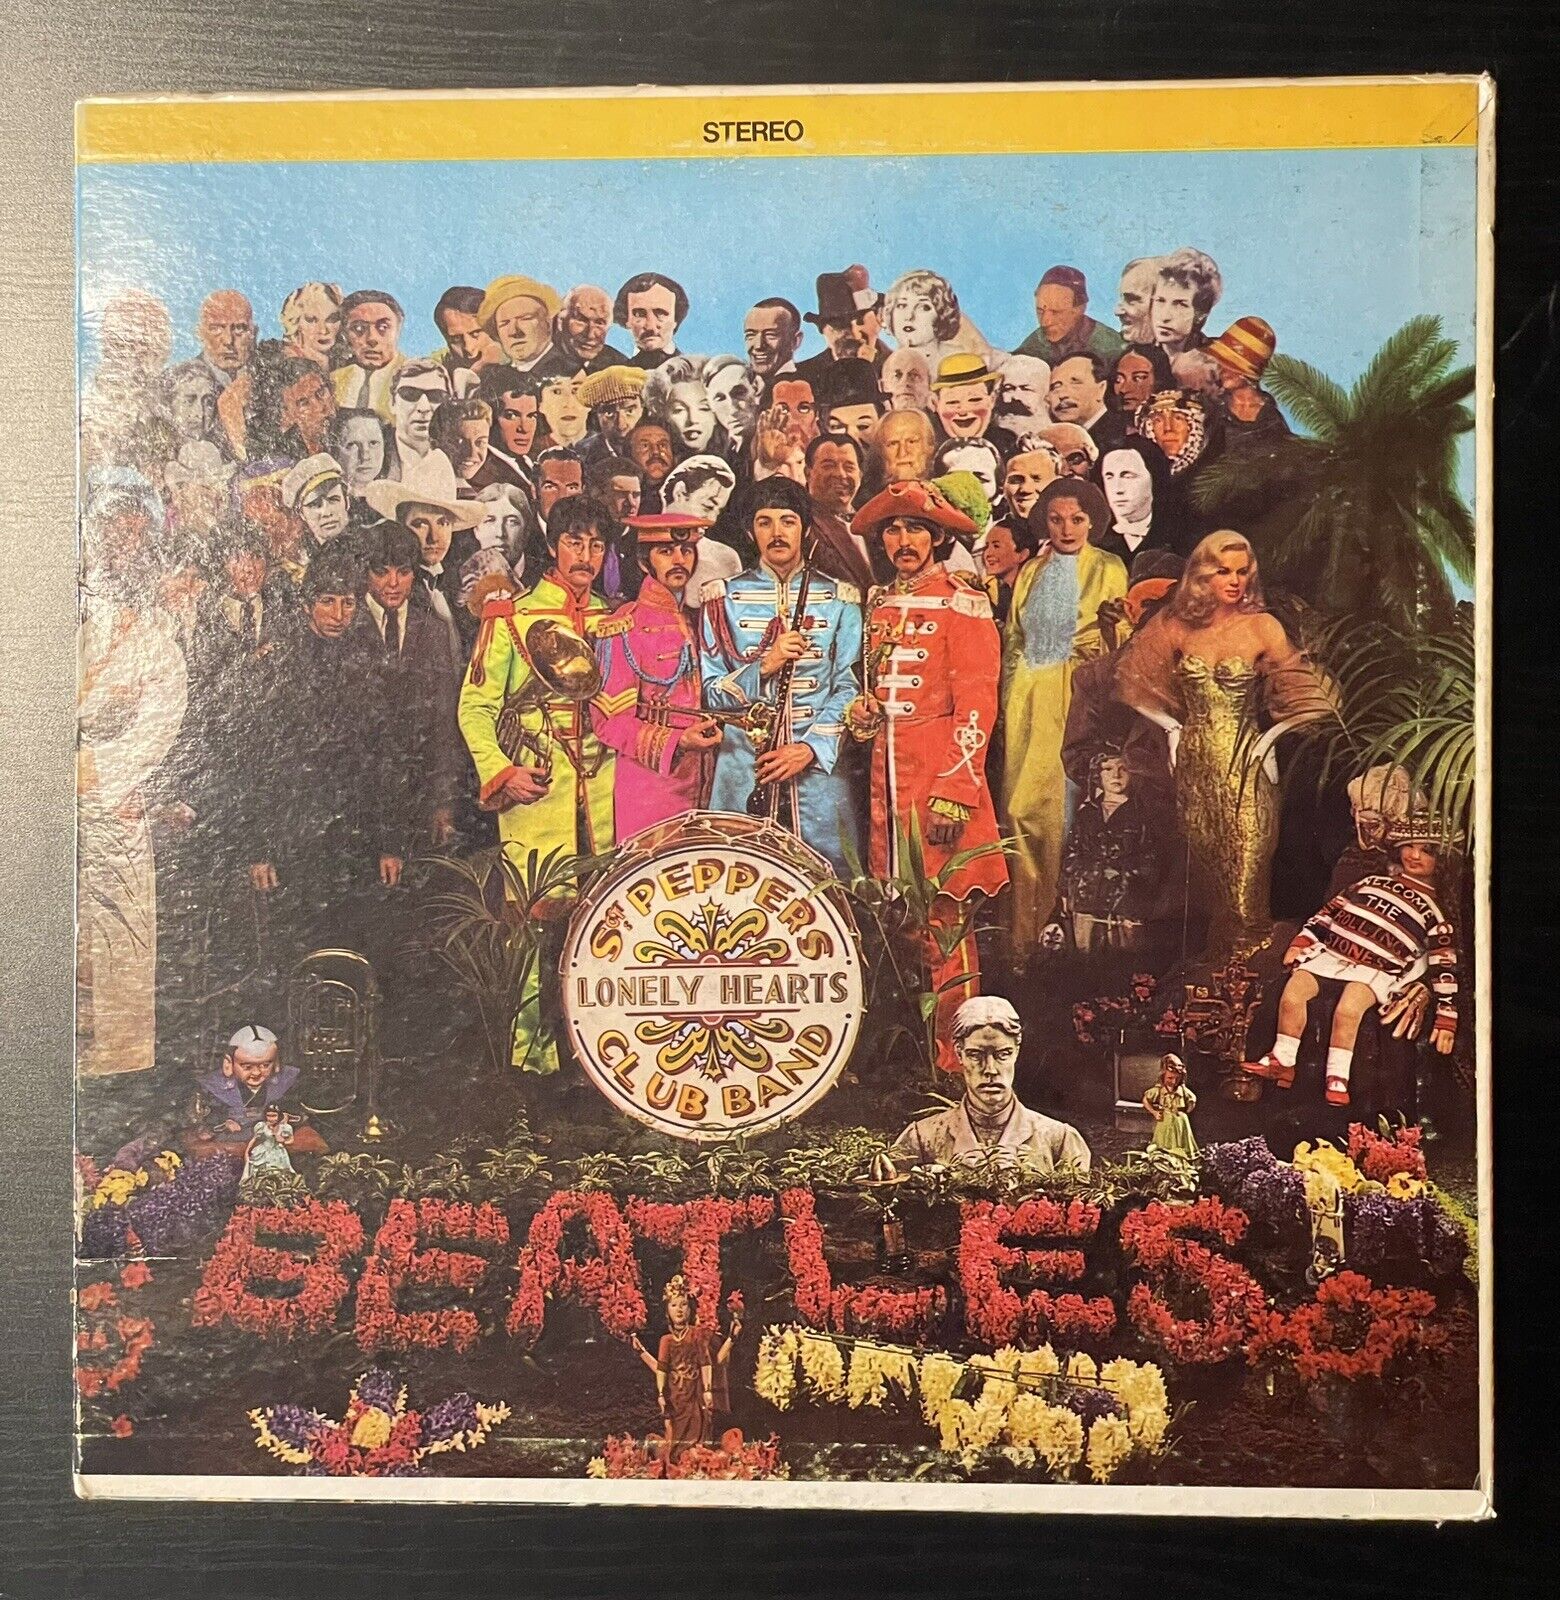 The Beatles Sgt Peppers Lonely Hearts Club Band 1967 Scranton Pressing SMAS-2653